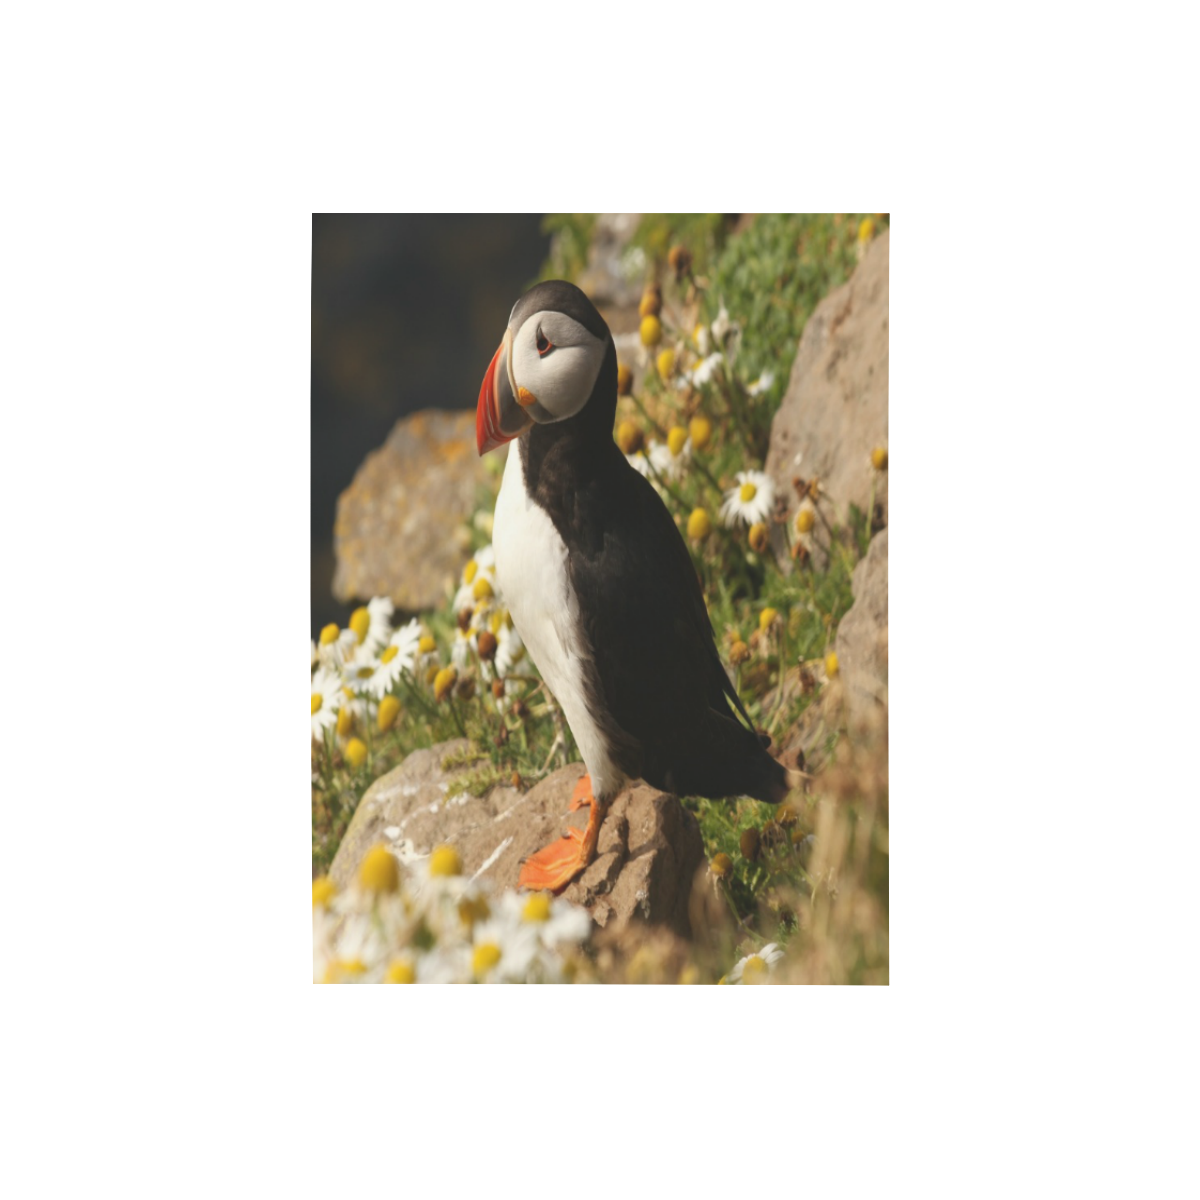 Pretty Puffin Photo Panel for Tabletop Display 6"x8"